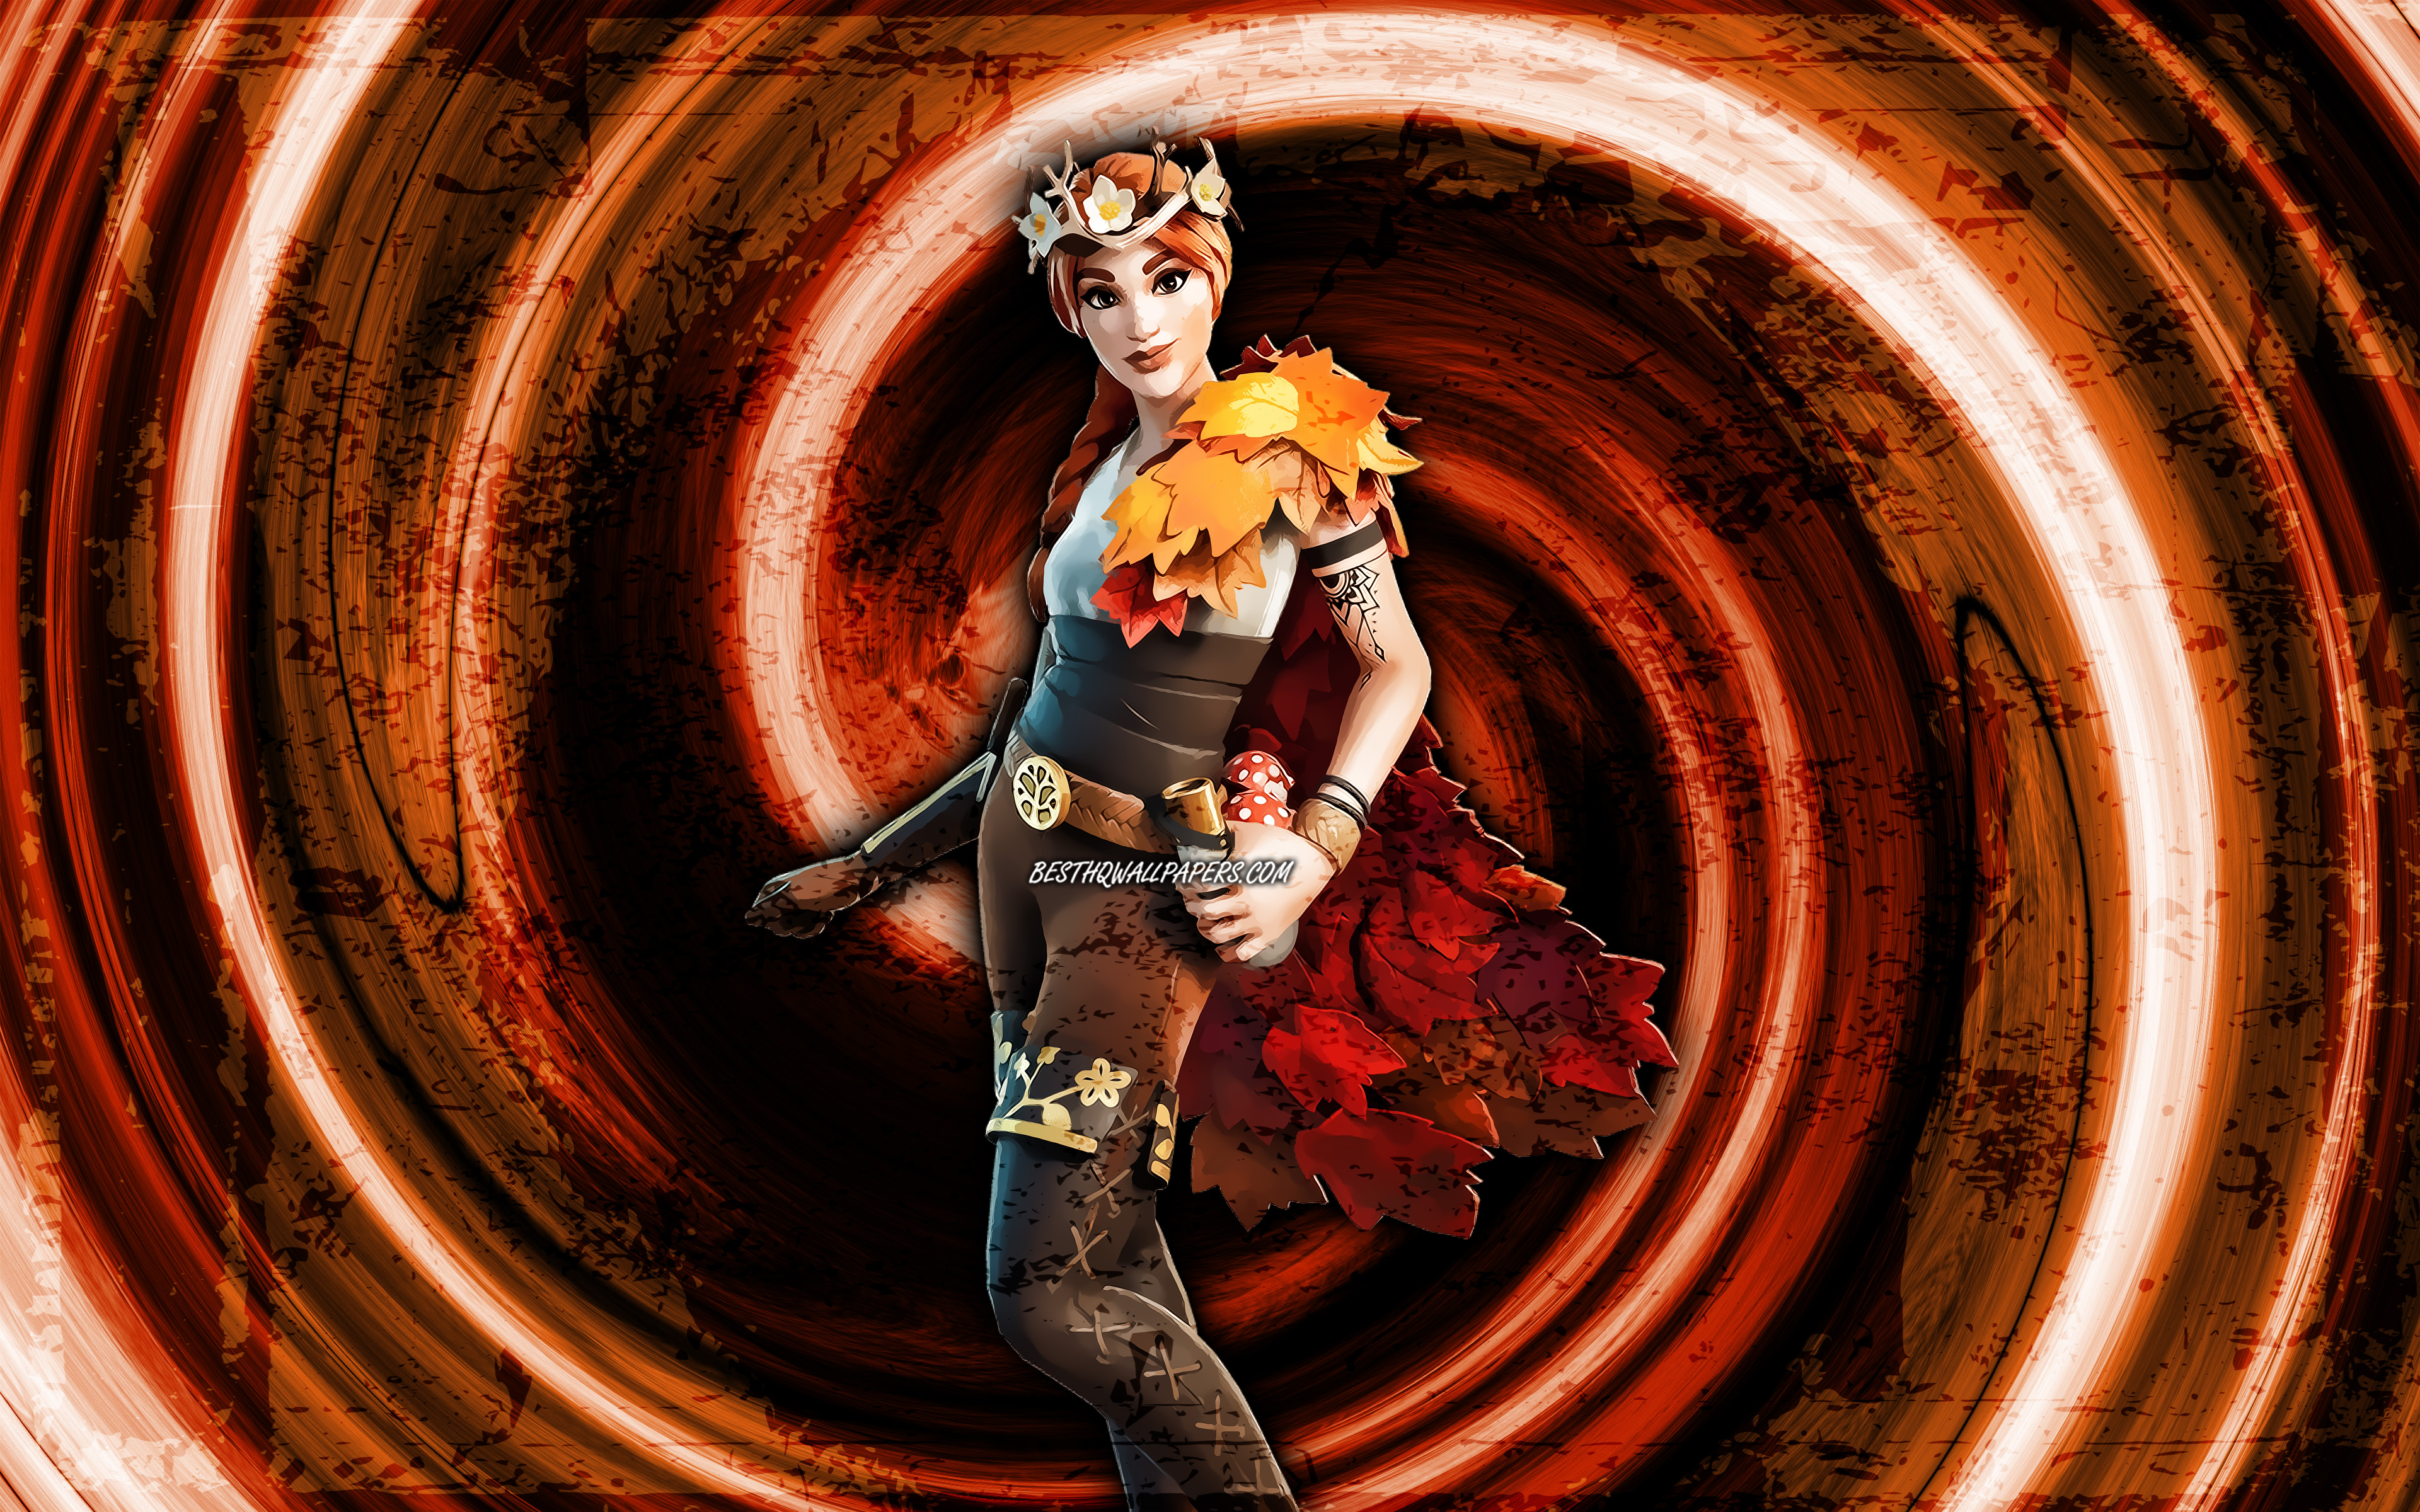 The Autumn Queen Fortnite Wallpapers